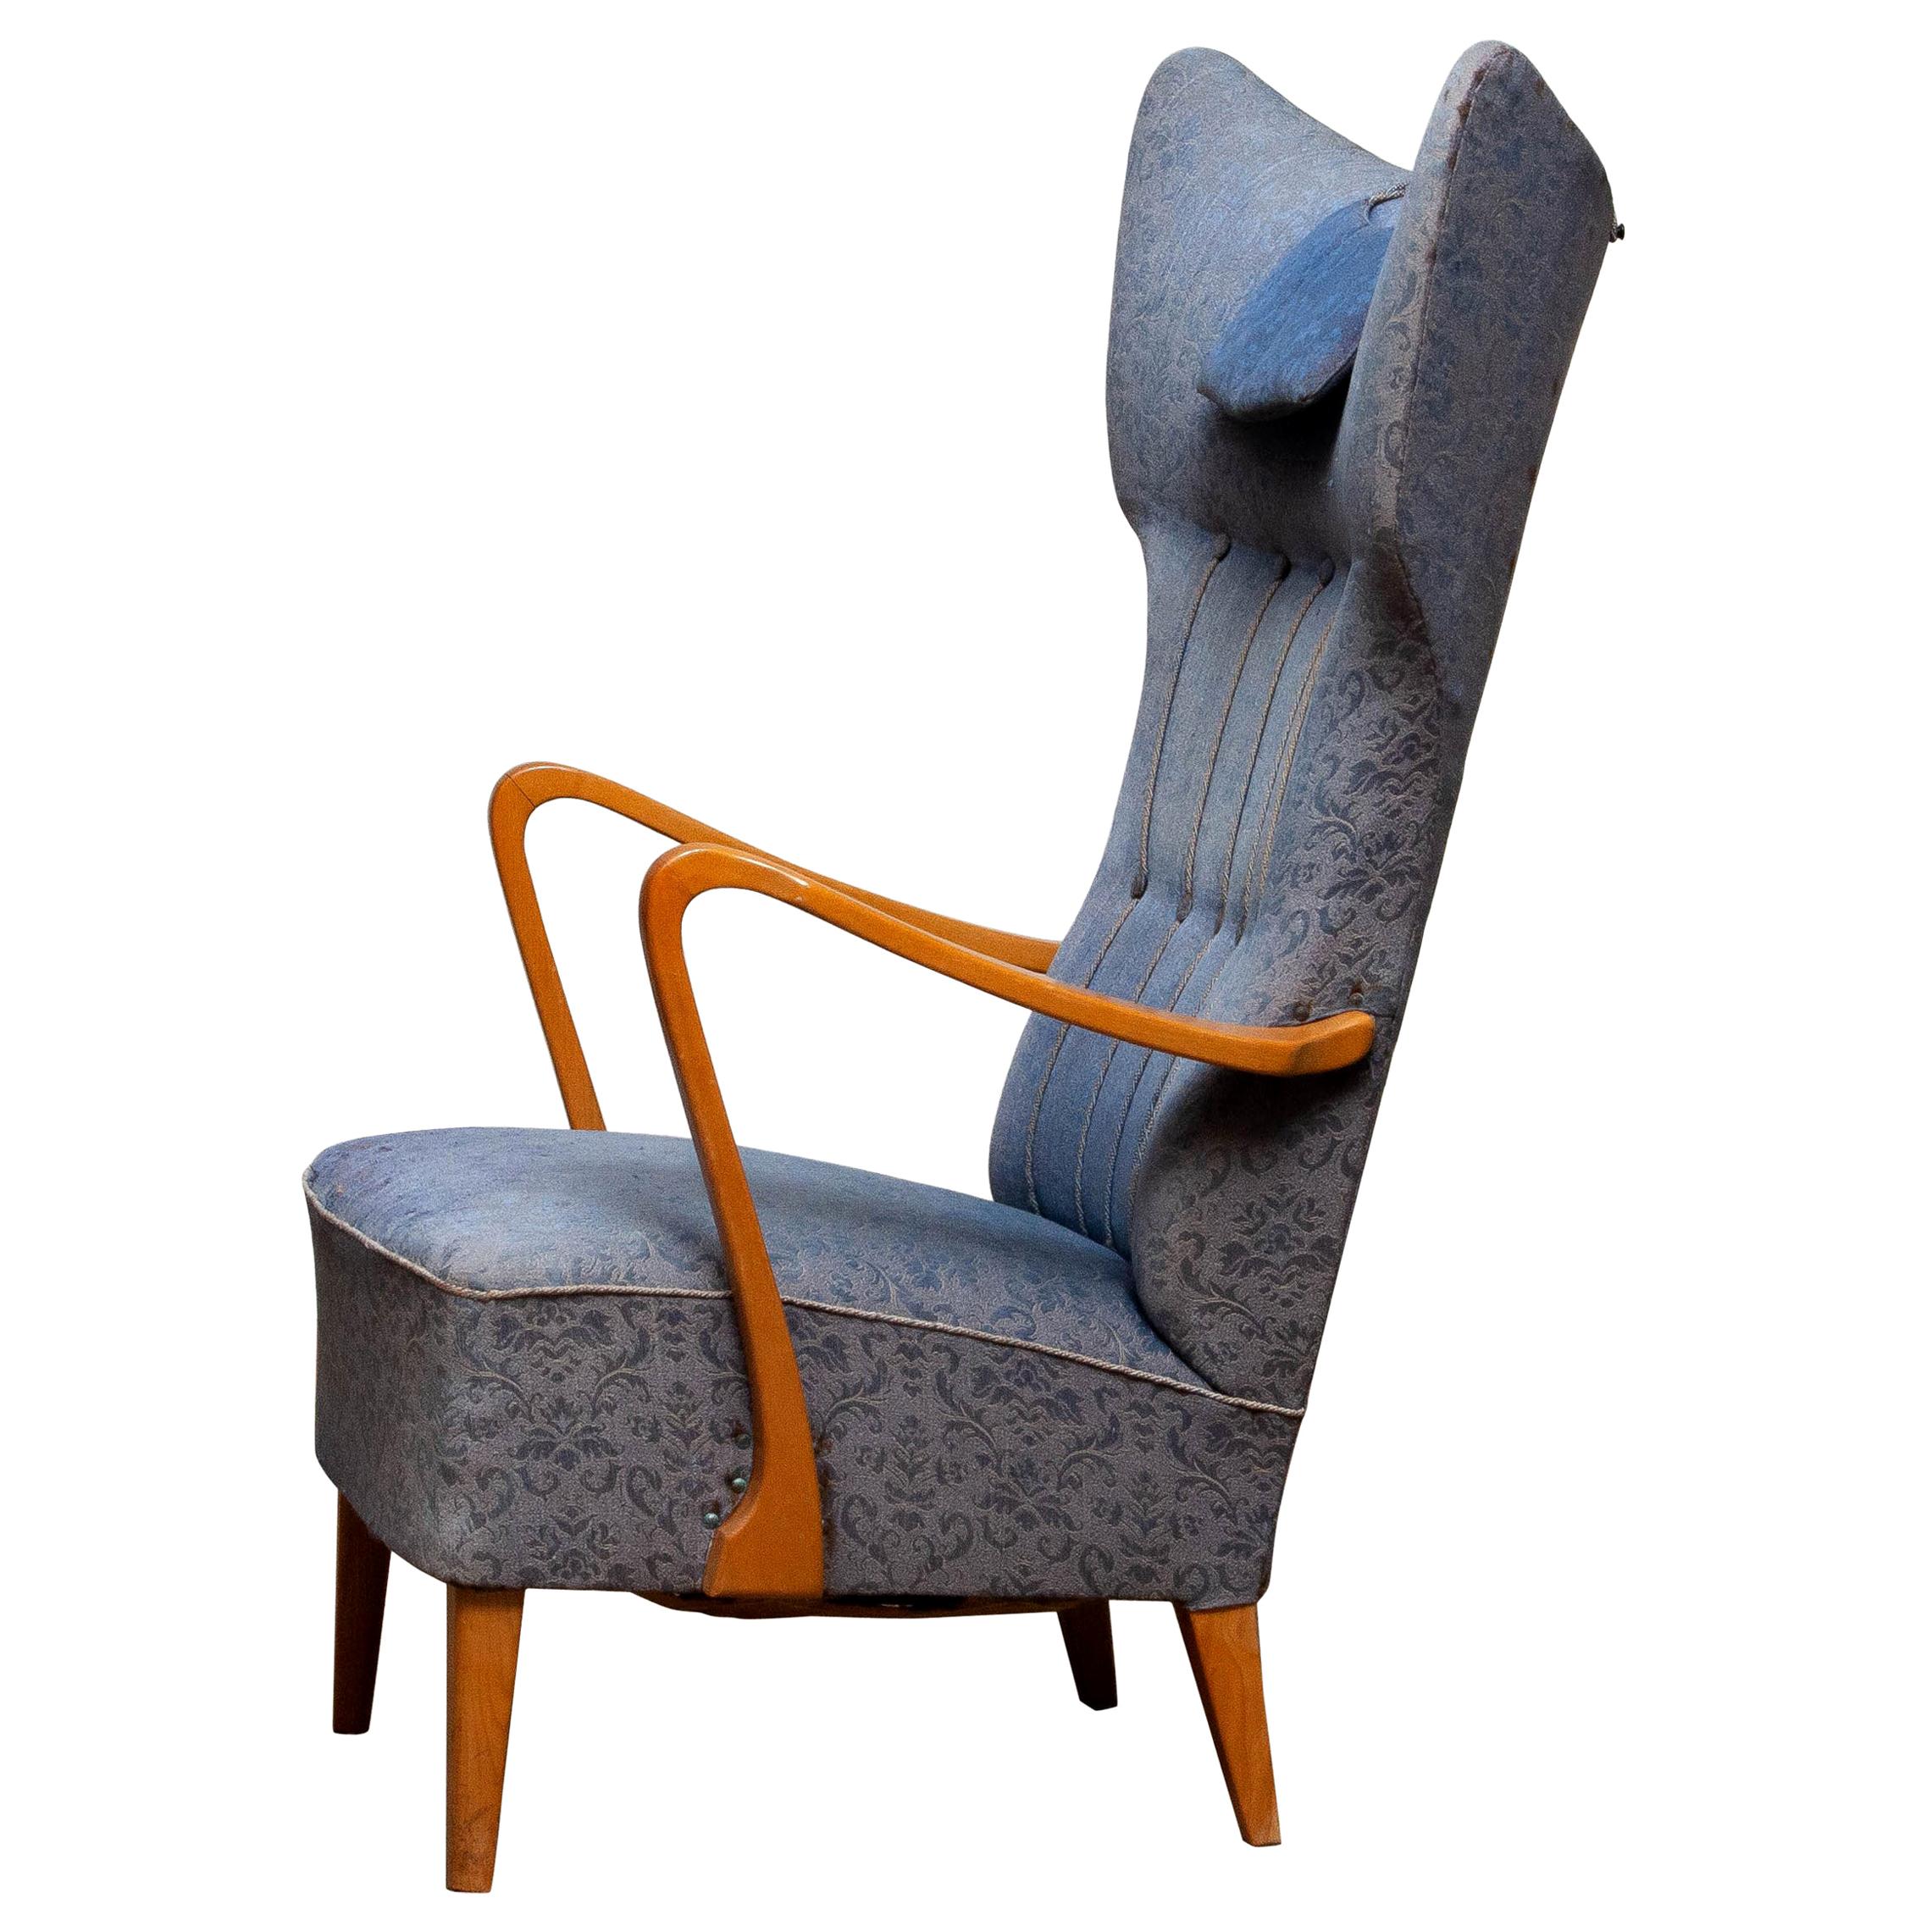 1920s, Slim Art Nouveau Swedish Wingback Chair in Oak with Extra High Backrest In Fair Condition In Silvolde, Gelderland